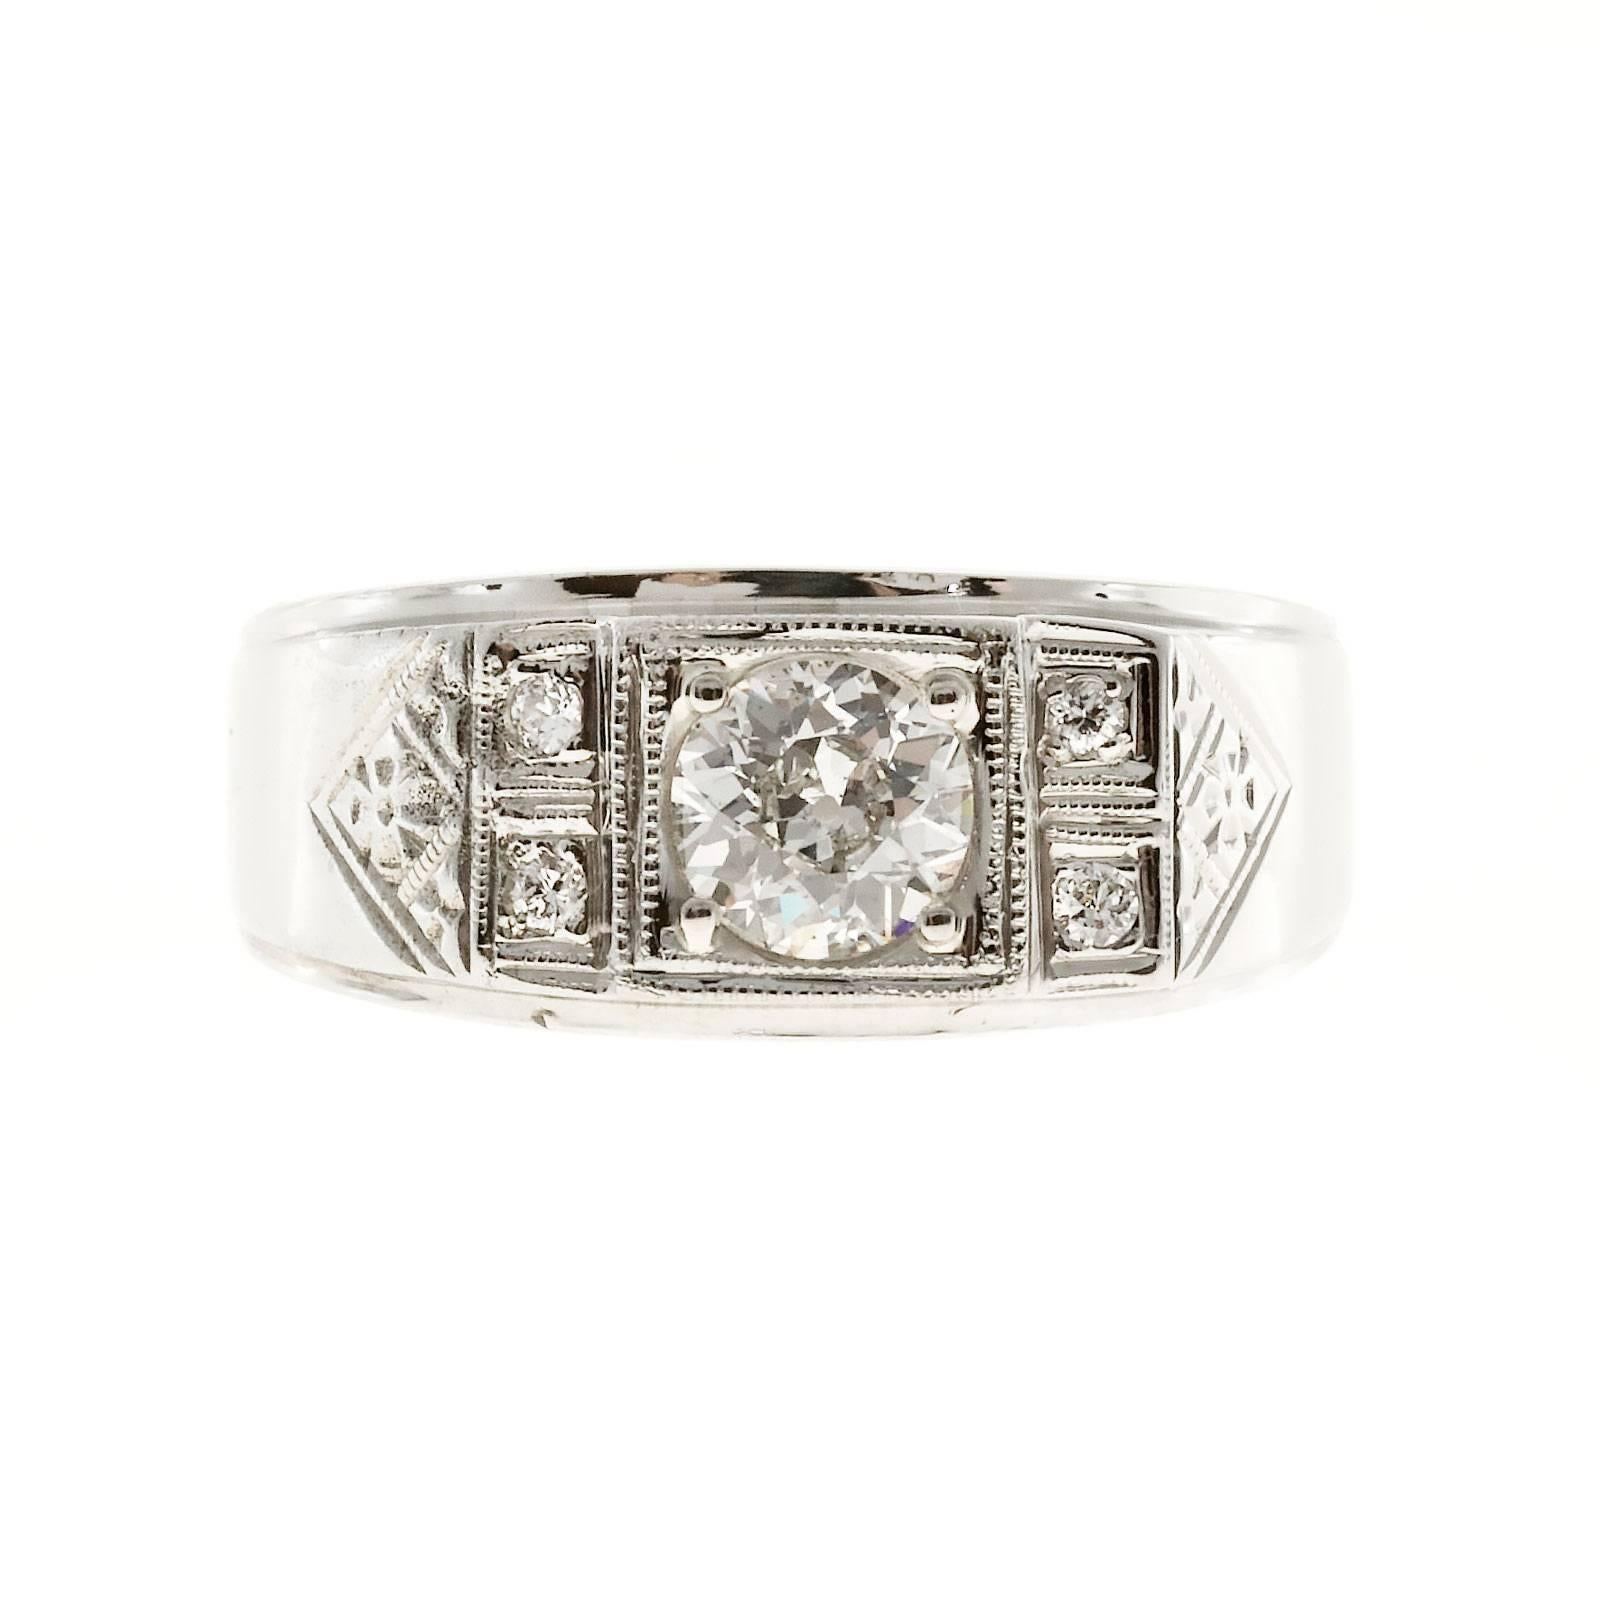 Retro men’s ring circa 1940 with hand engraving and side diamonds as well as a European cut GIA certified center diamond with raised crown and small table. Very sparkly.

1 old European cut diamond, approx. total weight .71cts, I, SI2, Depth: